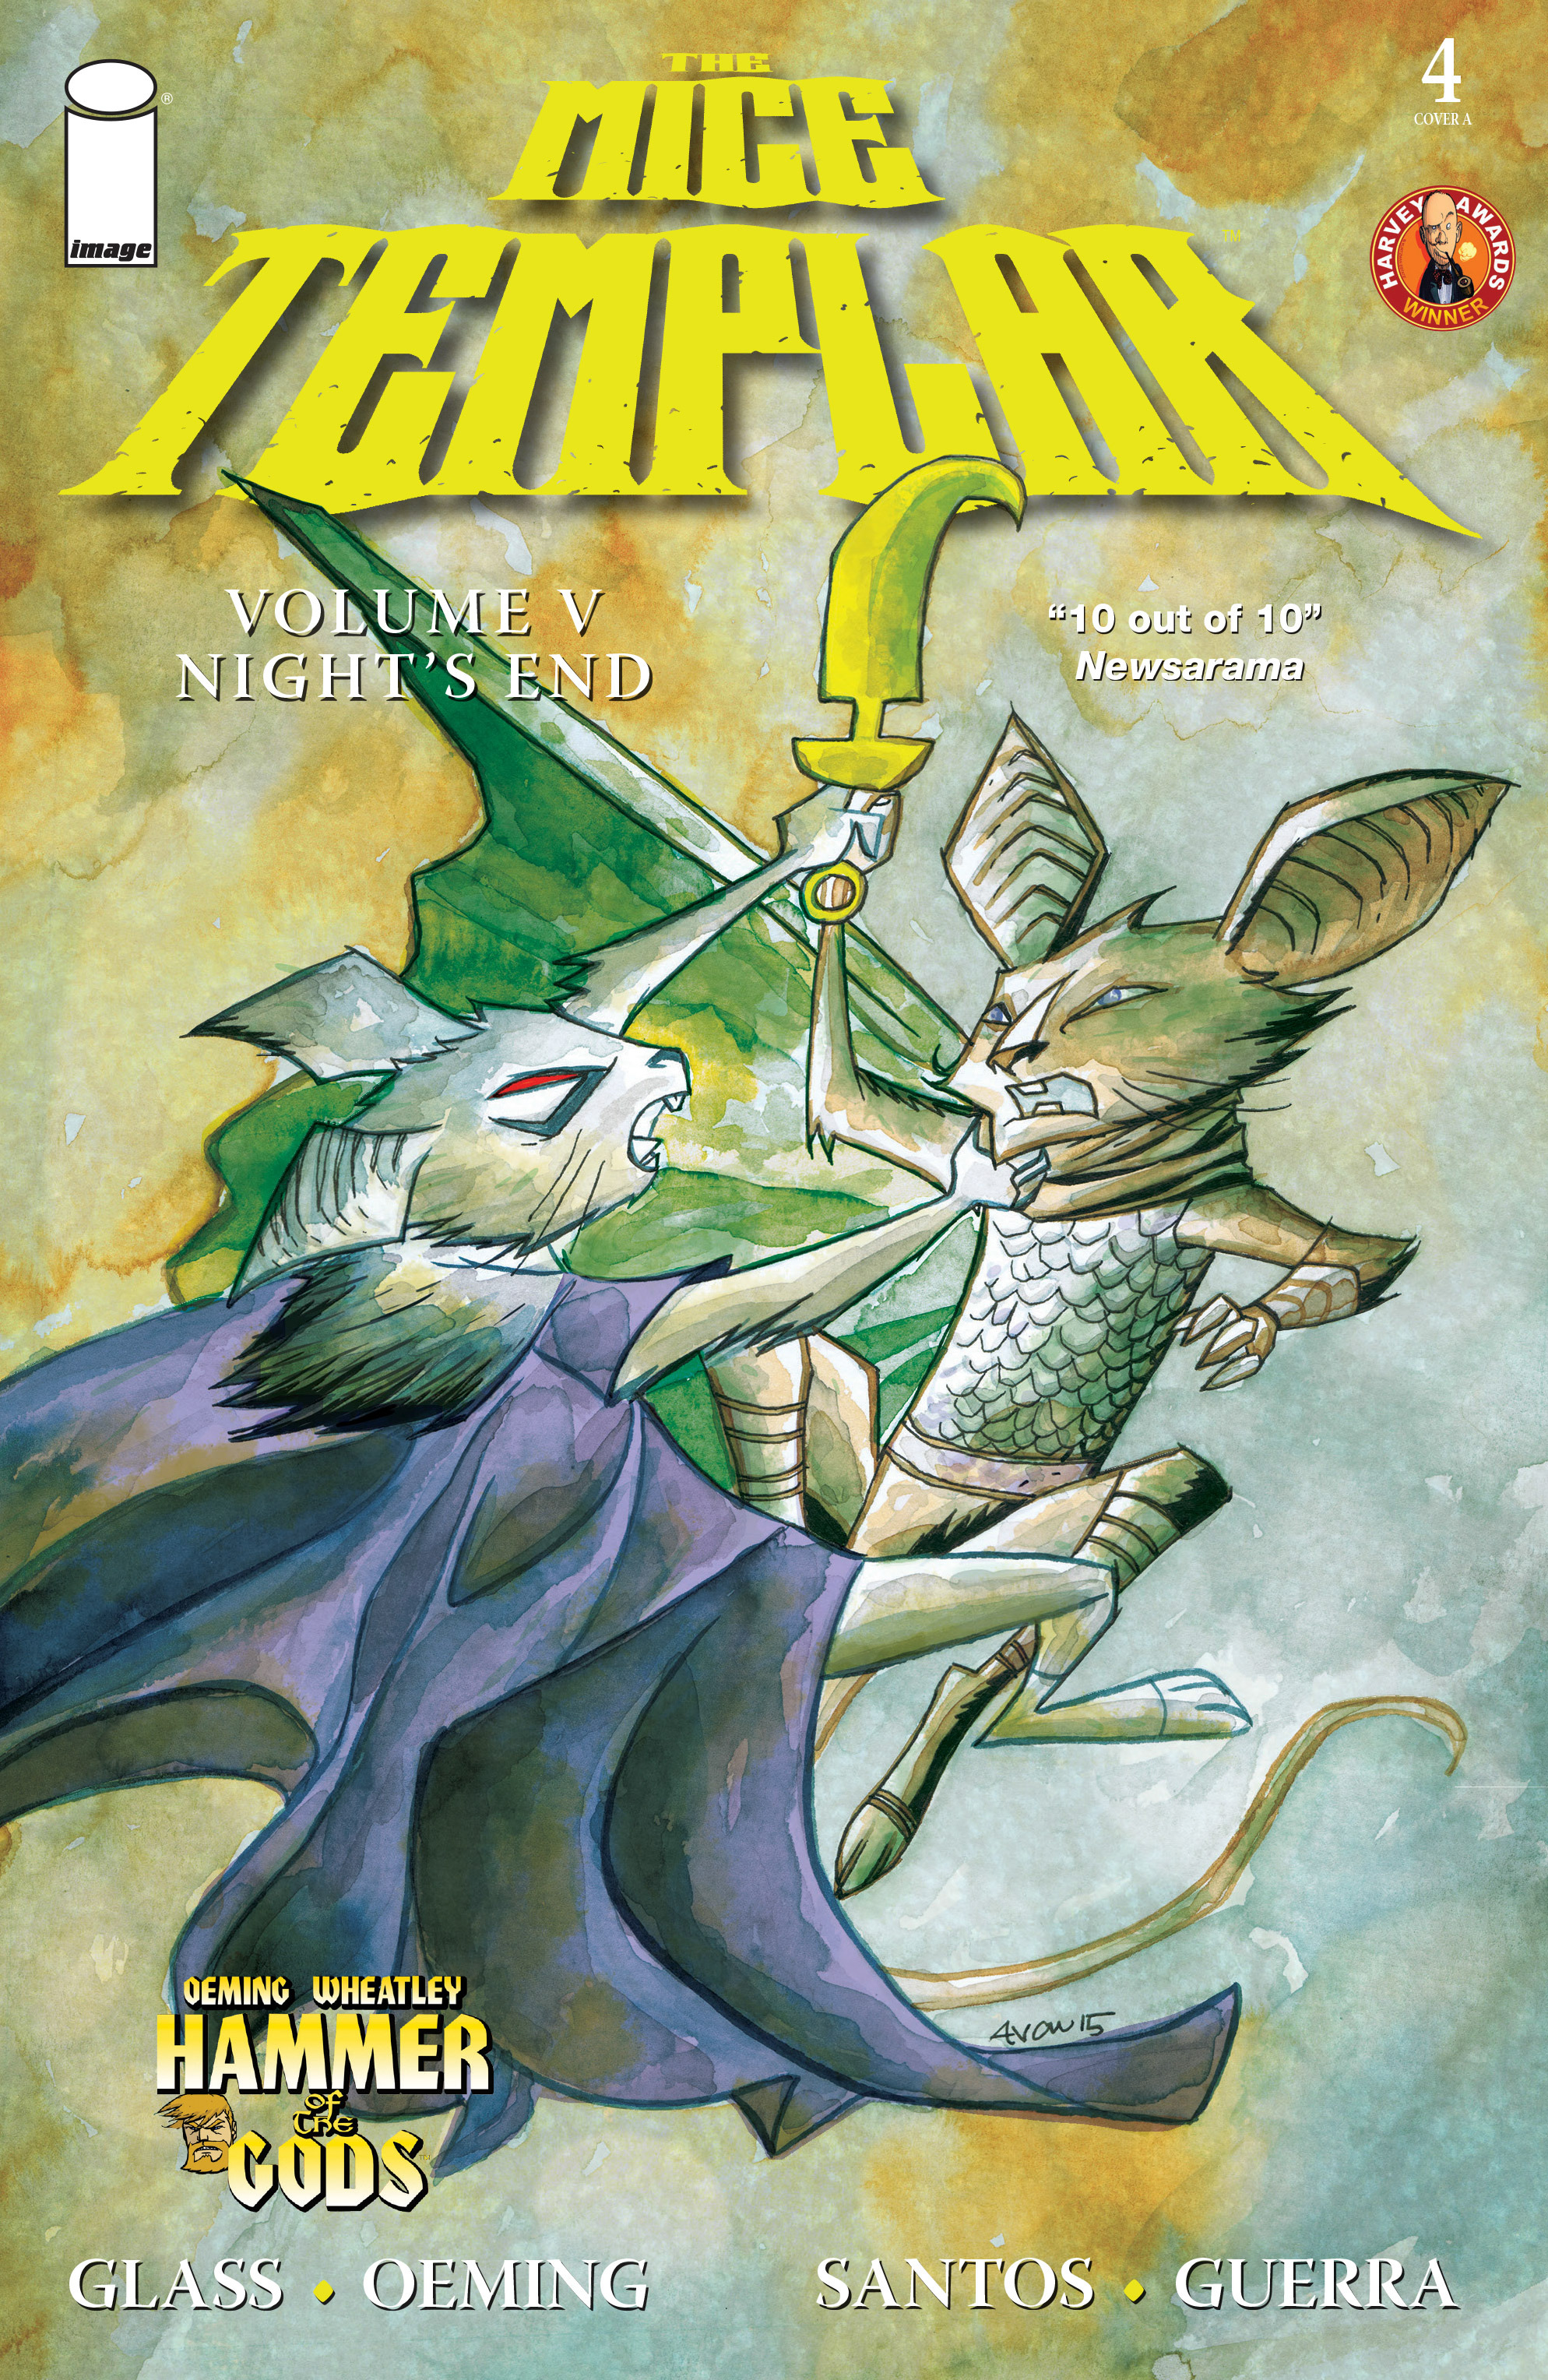 Read online The Mice Templar Volume 5: Night's End comic -  Issue #4 - 1